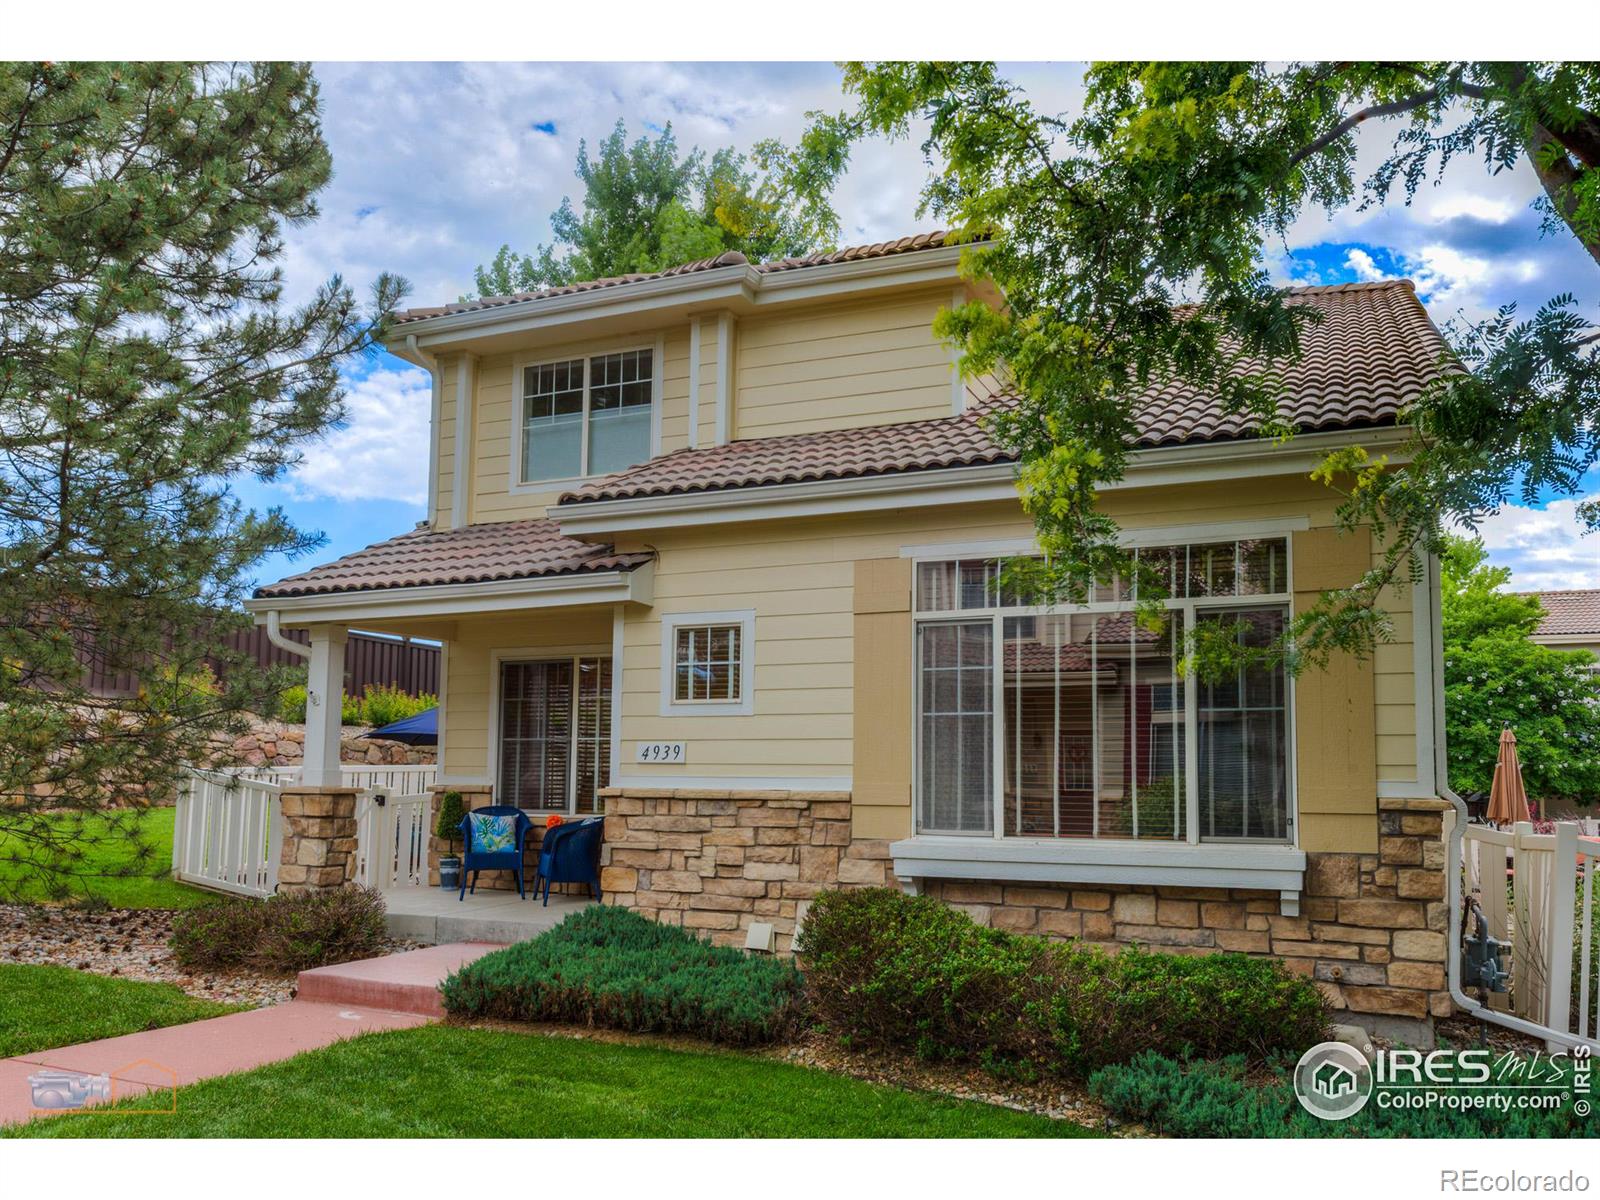 4939  pasadena way, broomfield sold home. Closed on 2024-05-08 for $605,000.